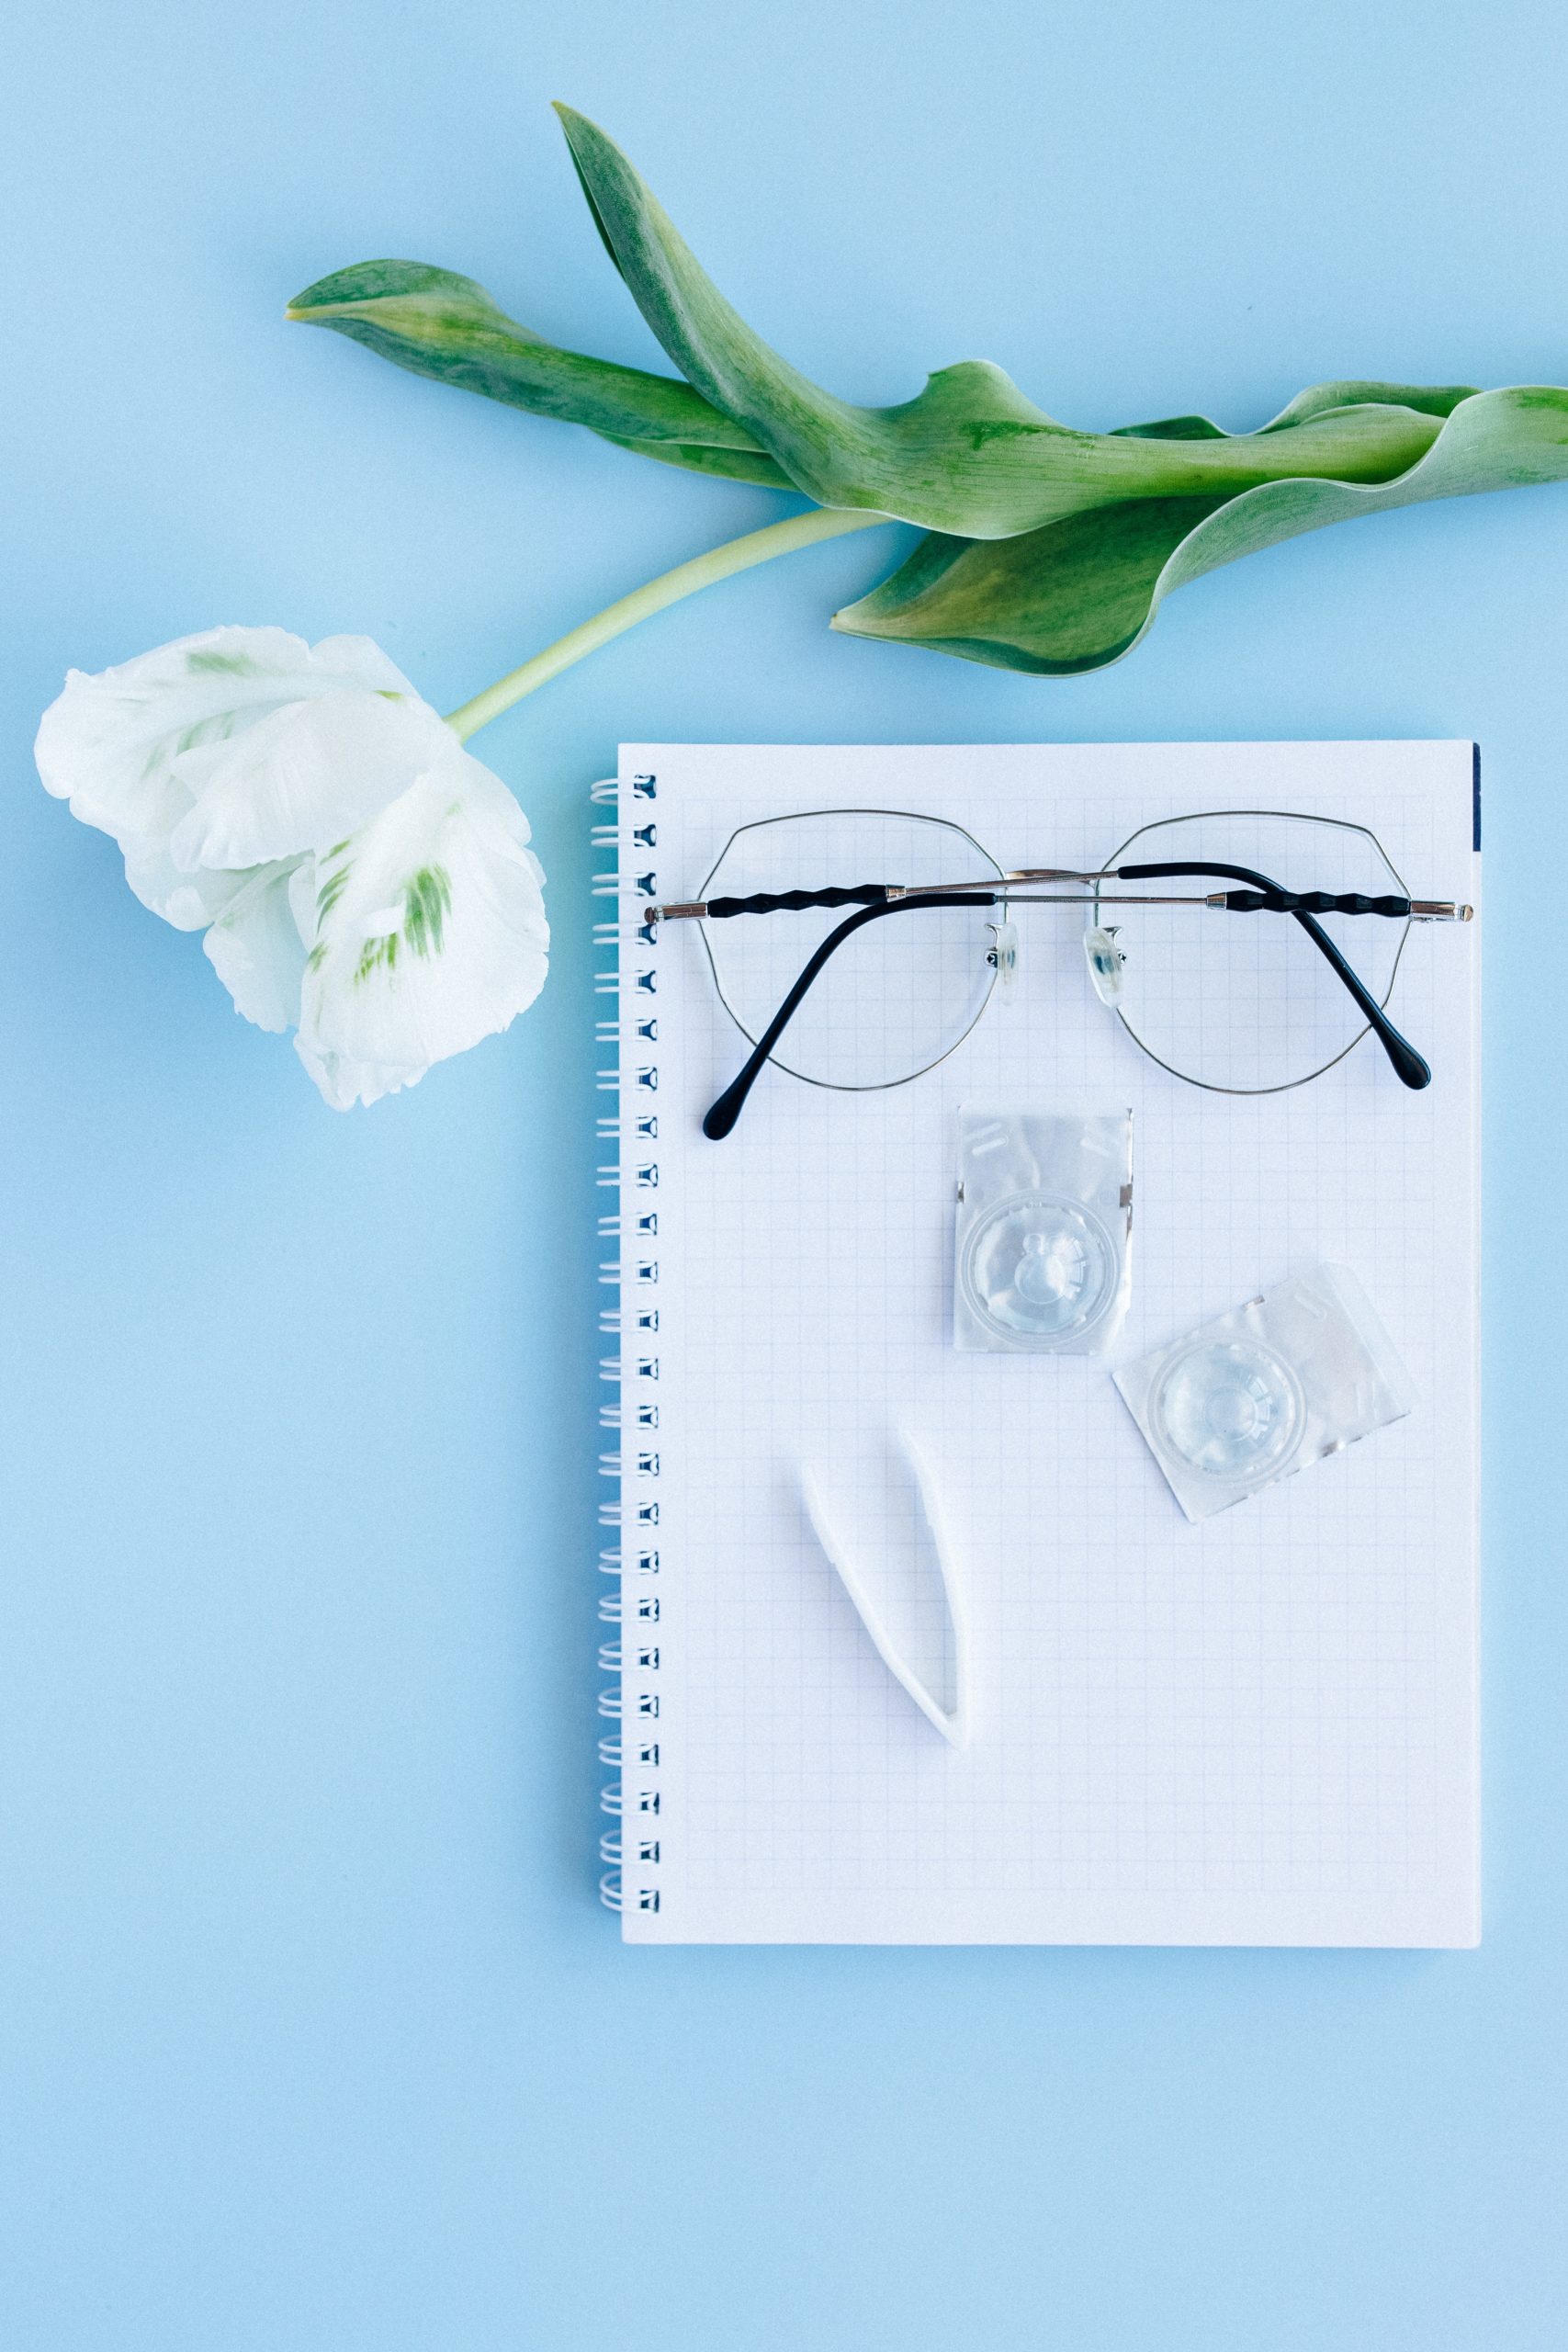 Will Contact Lenses Replace My Reading Glasses?